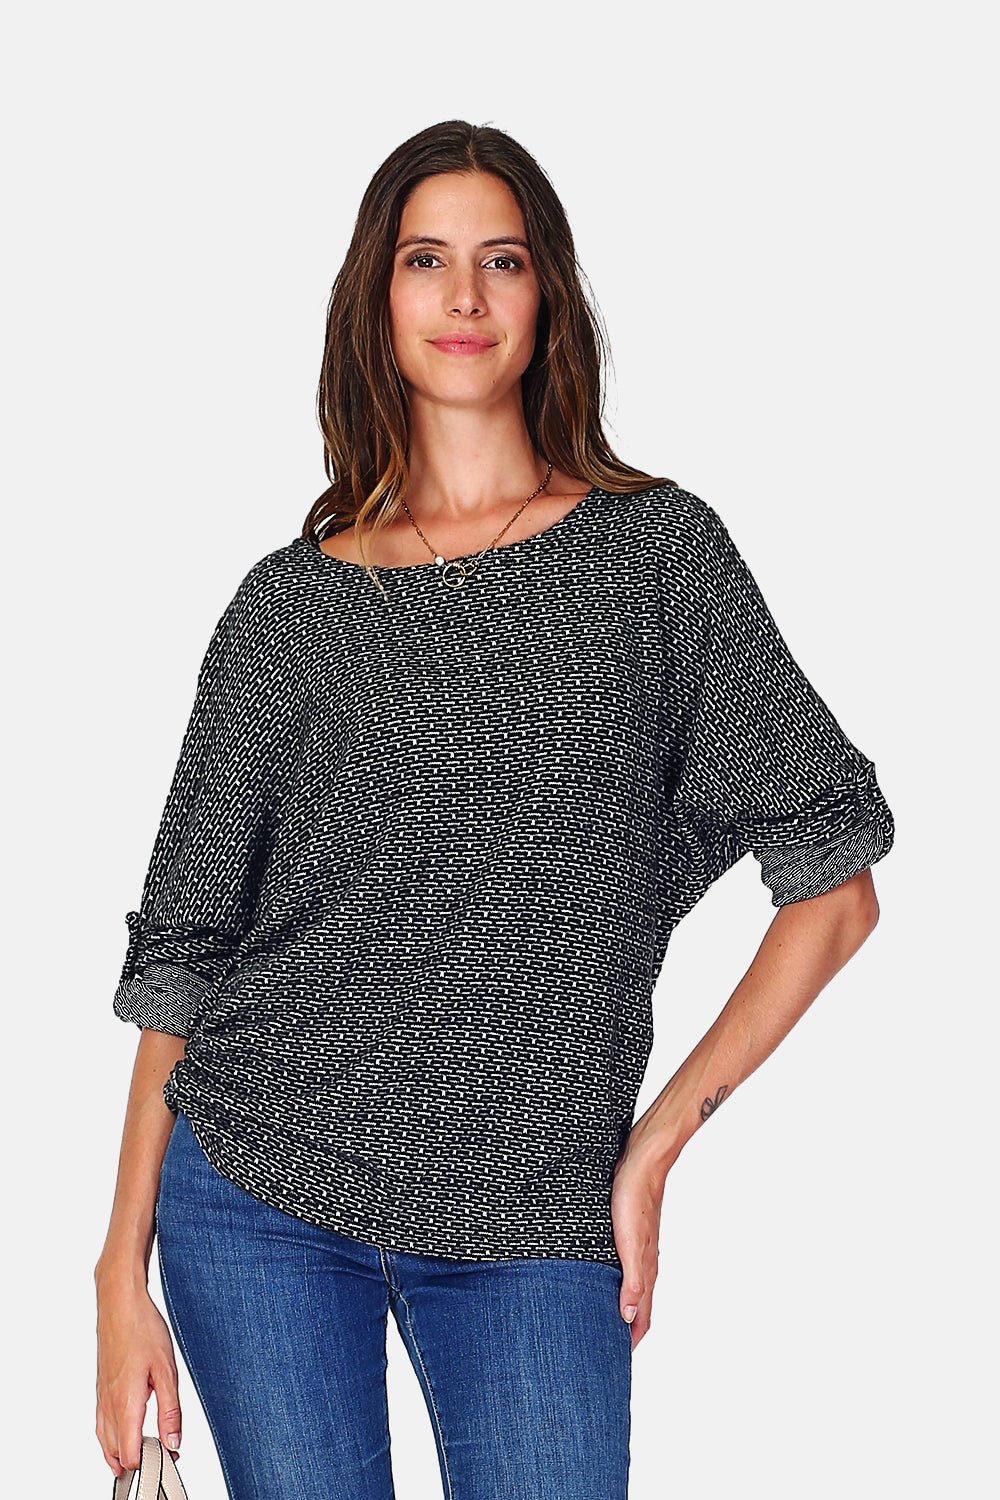 Asymmetrical crew neck sweater with batwing sleeves